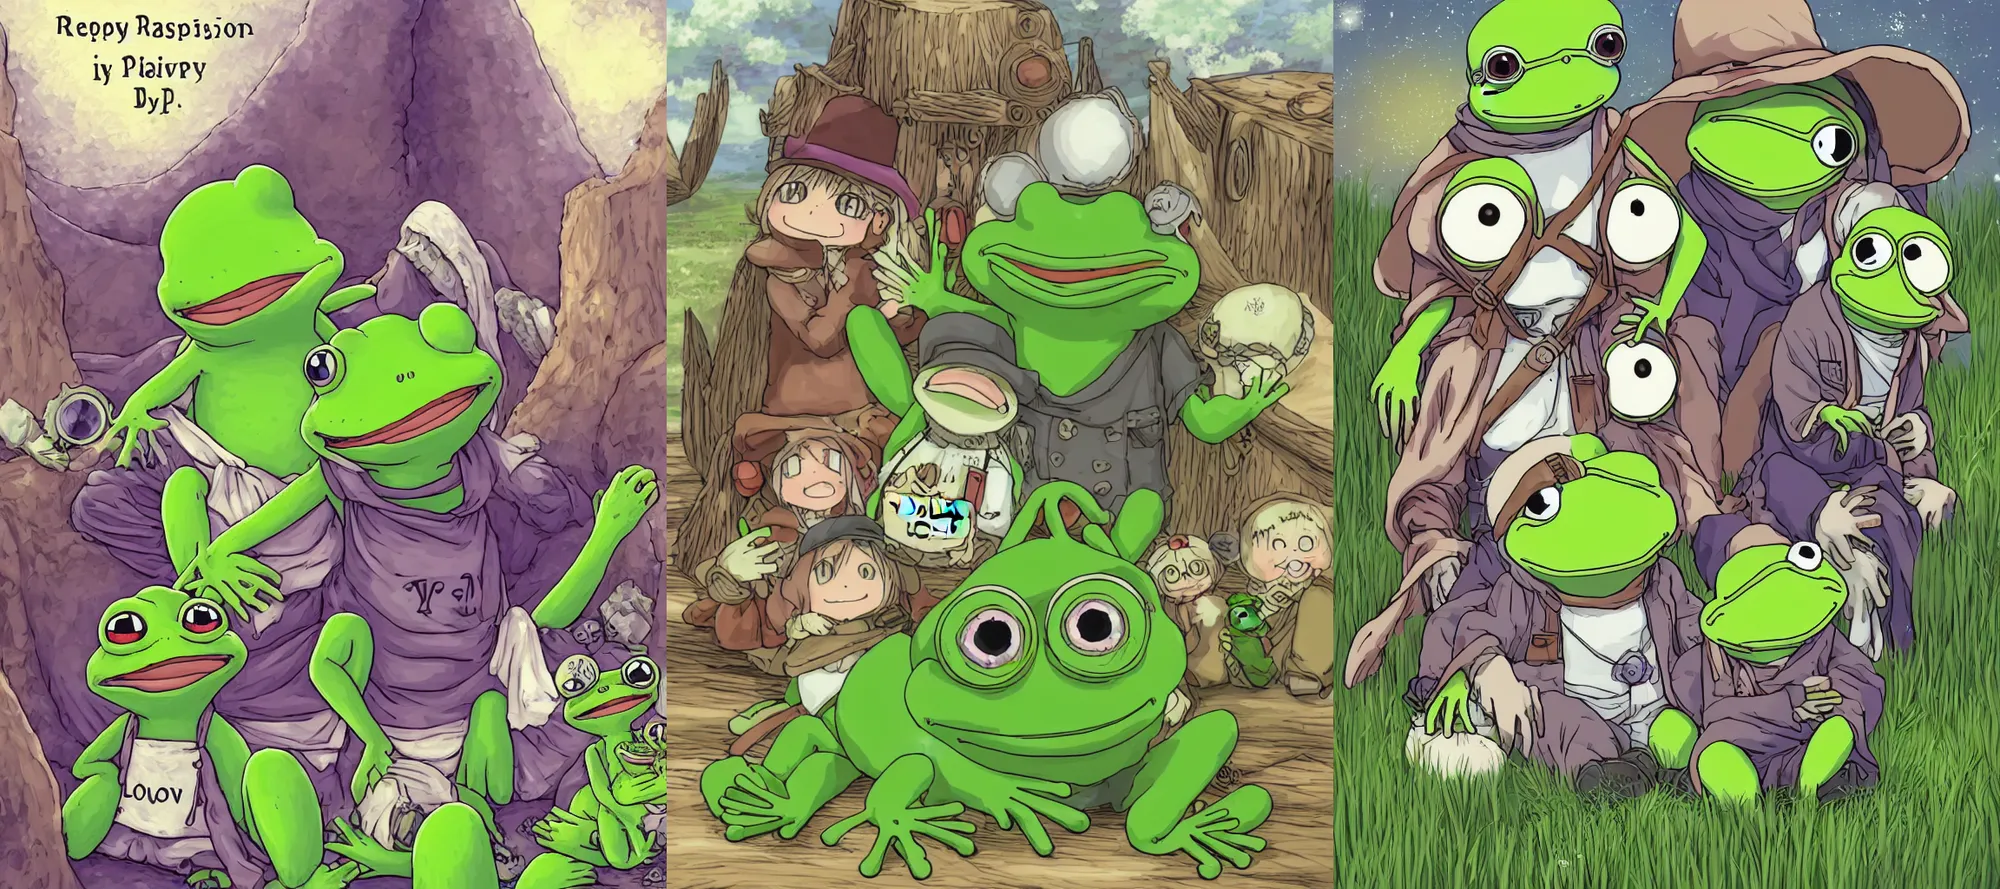 Prompt: resolution happiness of pepe love and life made in abyss peace and love harmony biblically acurate angels angels read dead redemption 2 ivory dream like storybooks pepe the frog happy among family in a field sitting the value of love a clear prismatic sky, edge of nothingness love, warm ,Luminism, prismatic , fractals , pepe the frog , art in the style of Akihito Tsukushi and and Arnold Lobel , claymation